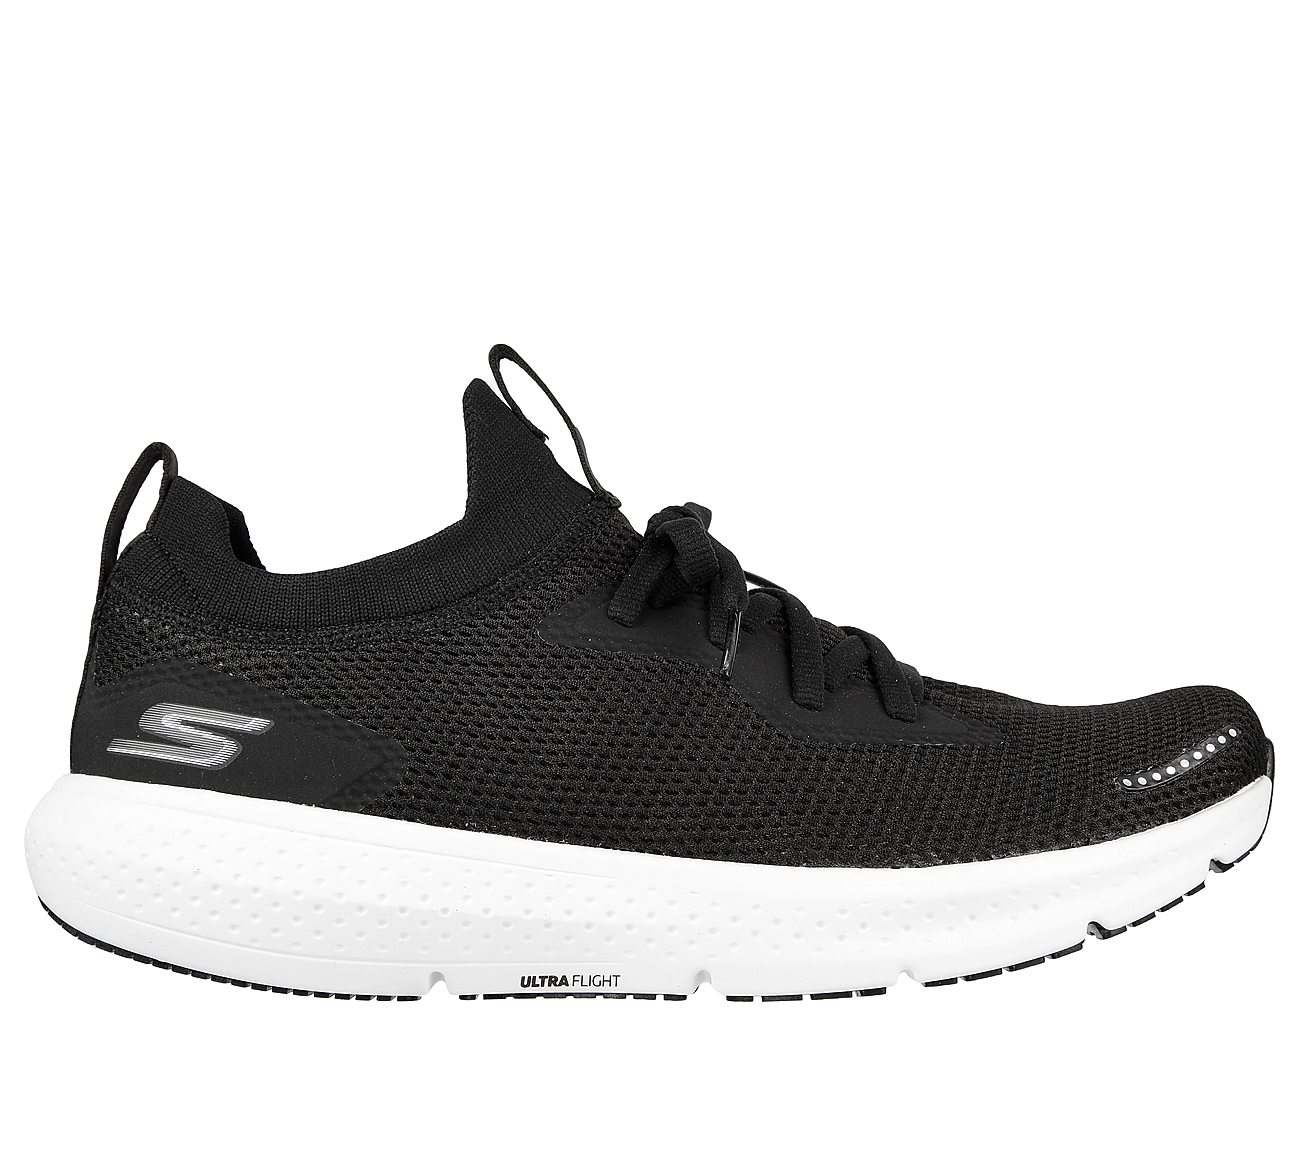 GO RUN SUPERSONIC - APEX, BLACK/WHITE Footwear Lateral View